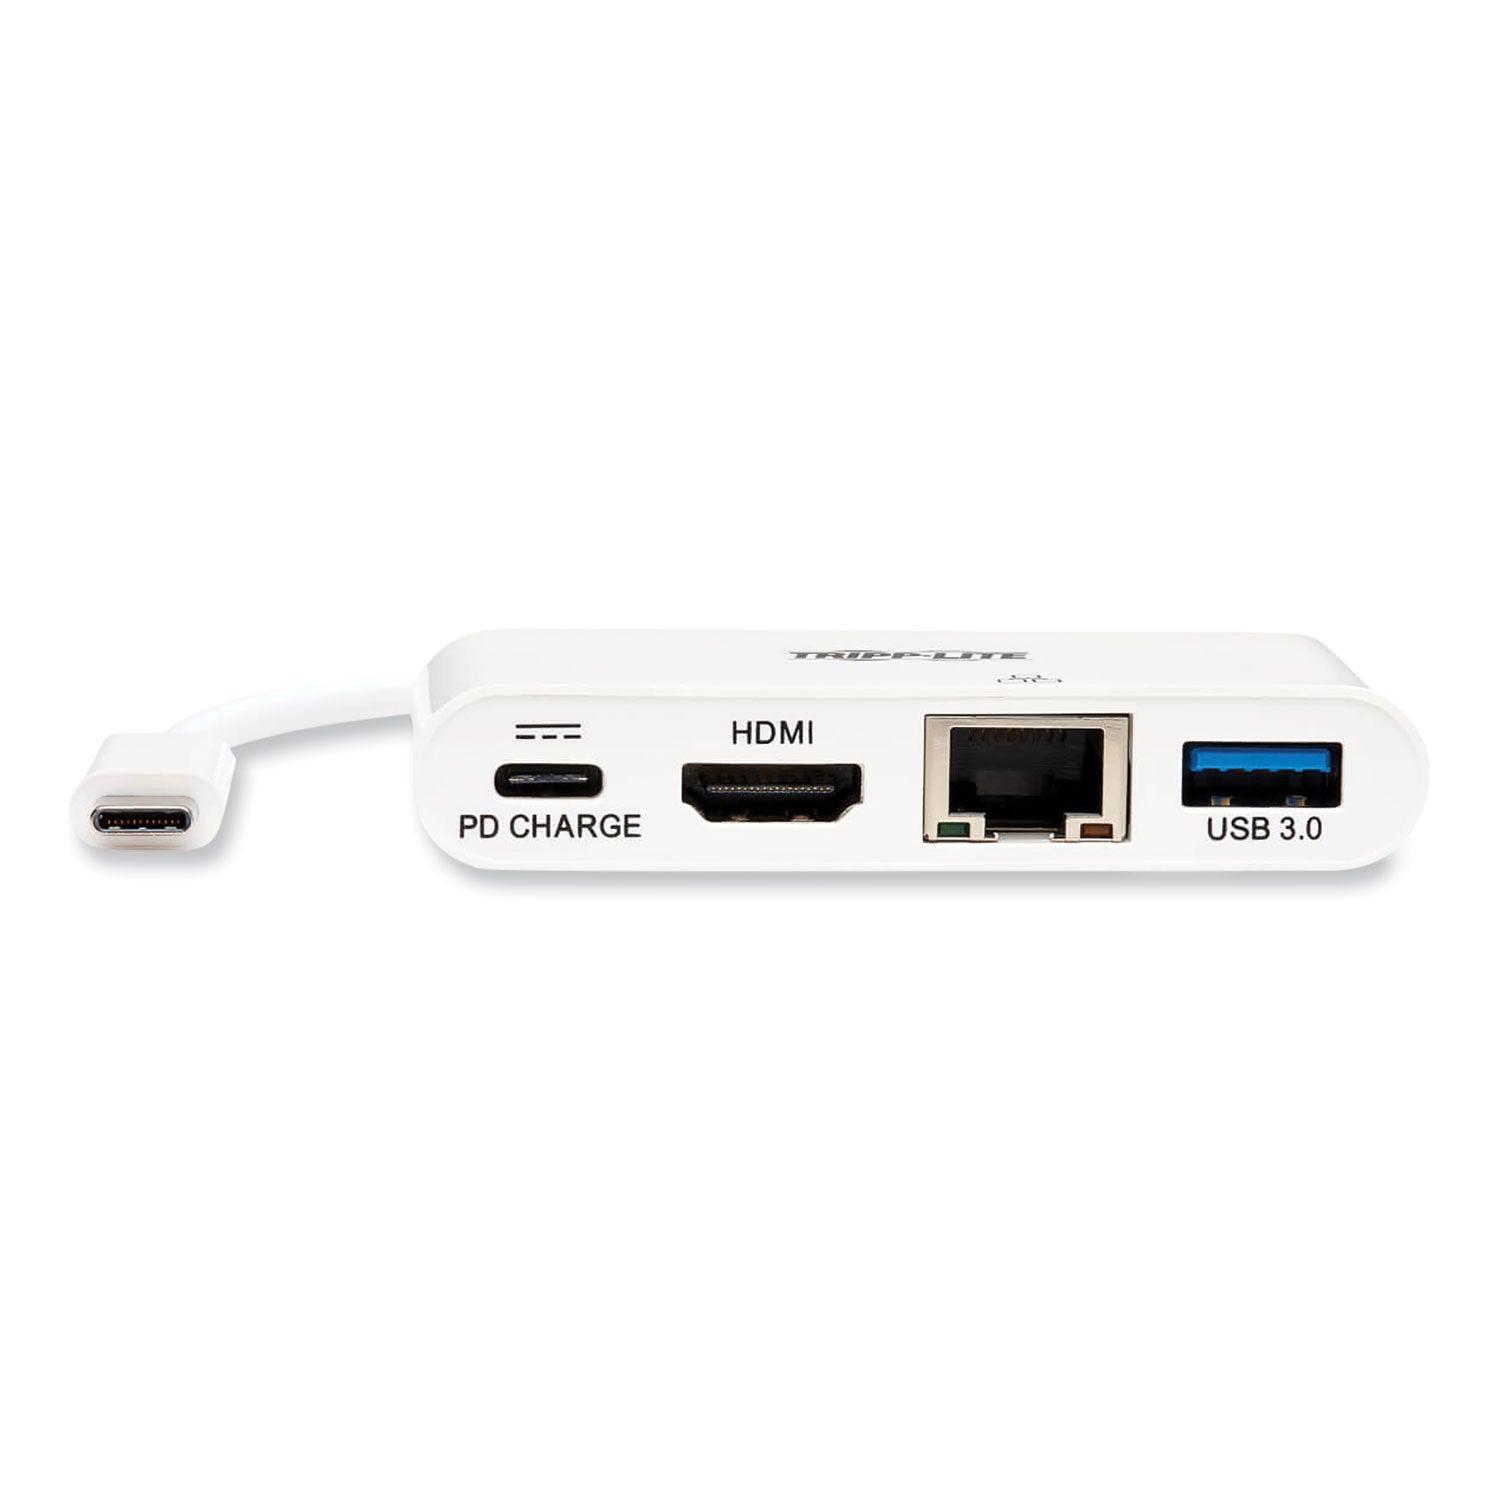 4k-dock-with-charging-and-ethernet-usb-c-4k-hdmi-usb-a-pd-charging-white_trpu44406nh4guc - 8